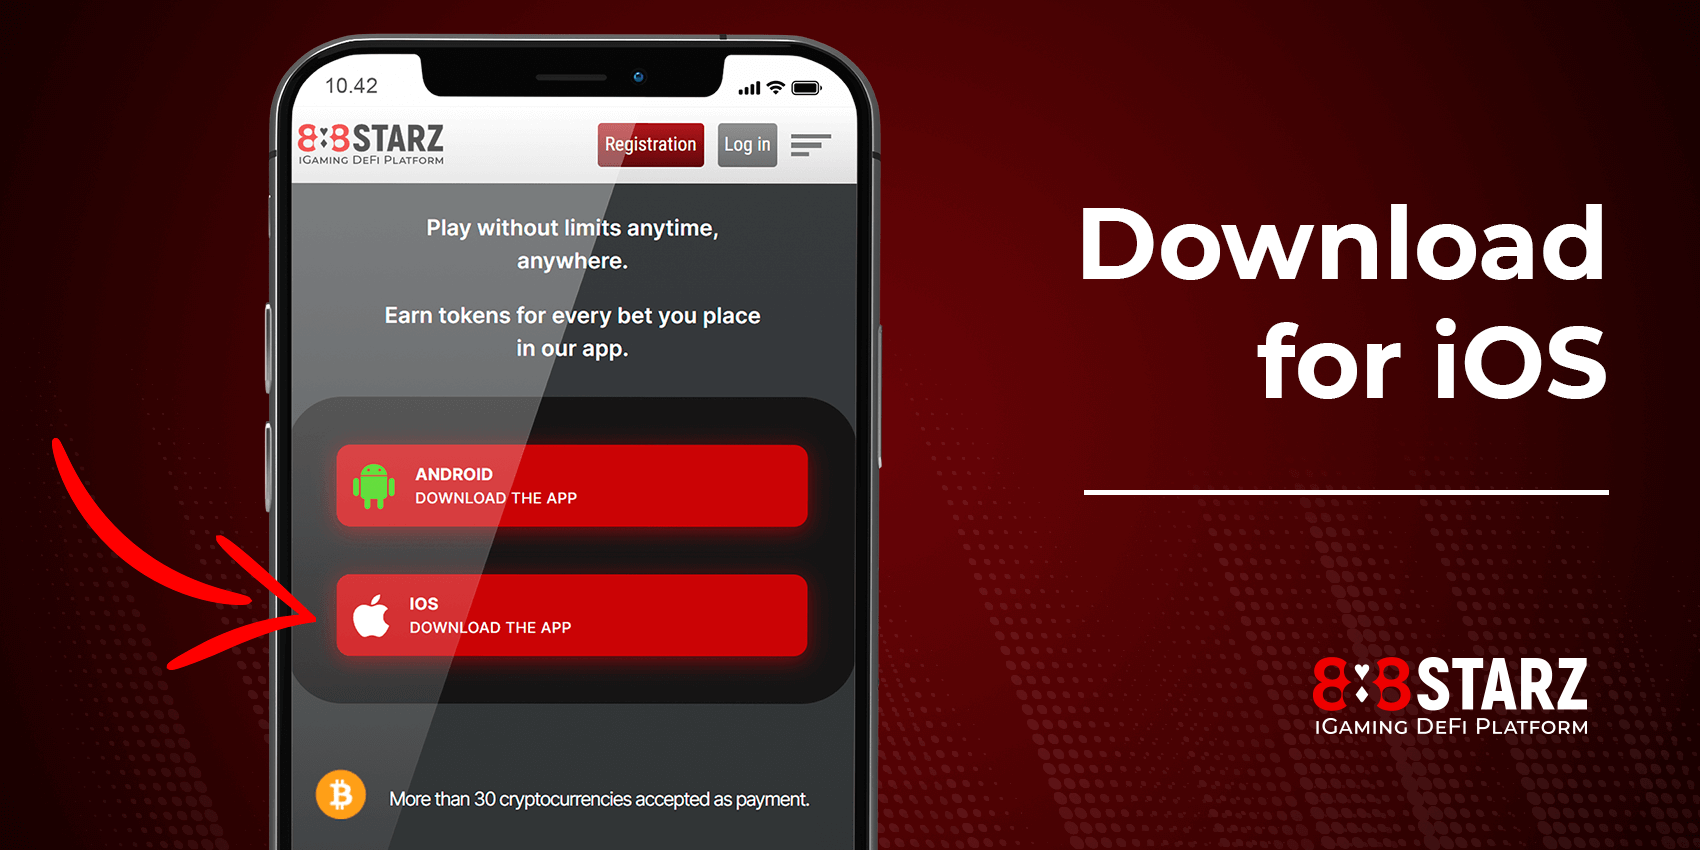 How to download 888Starz for iOS